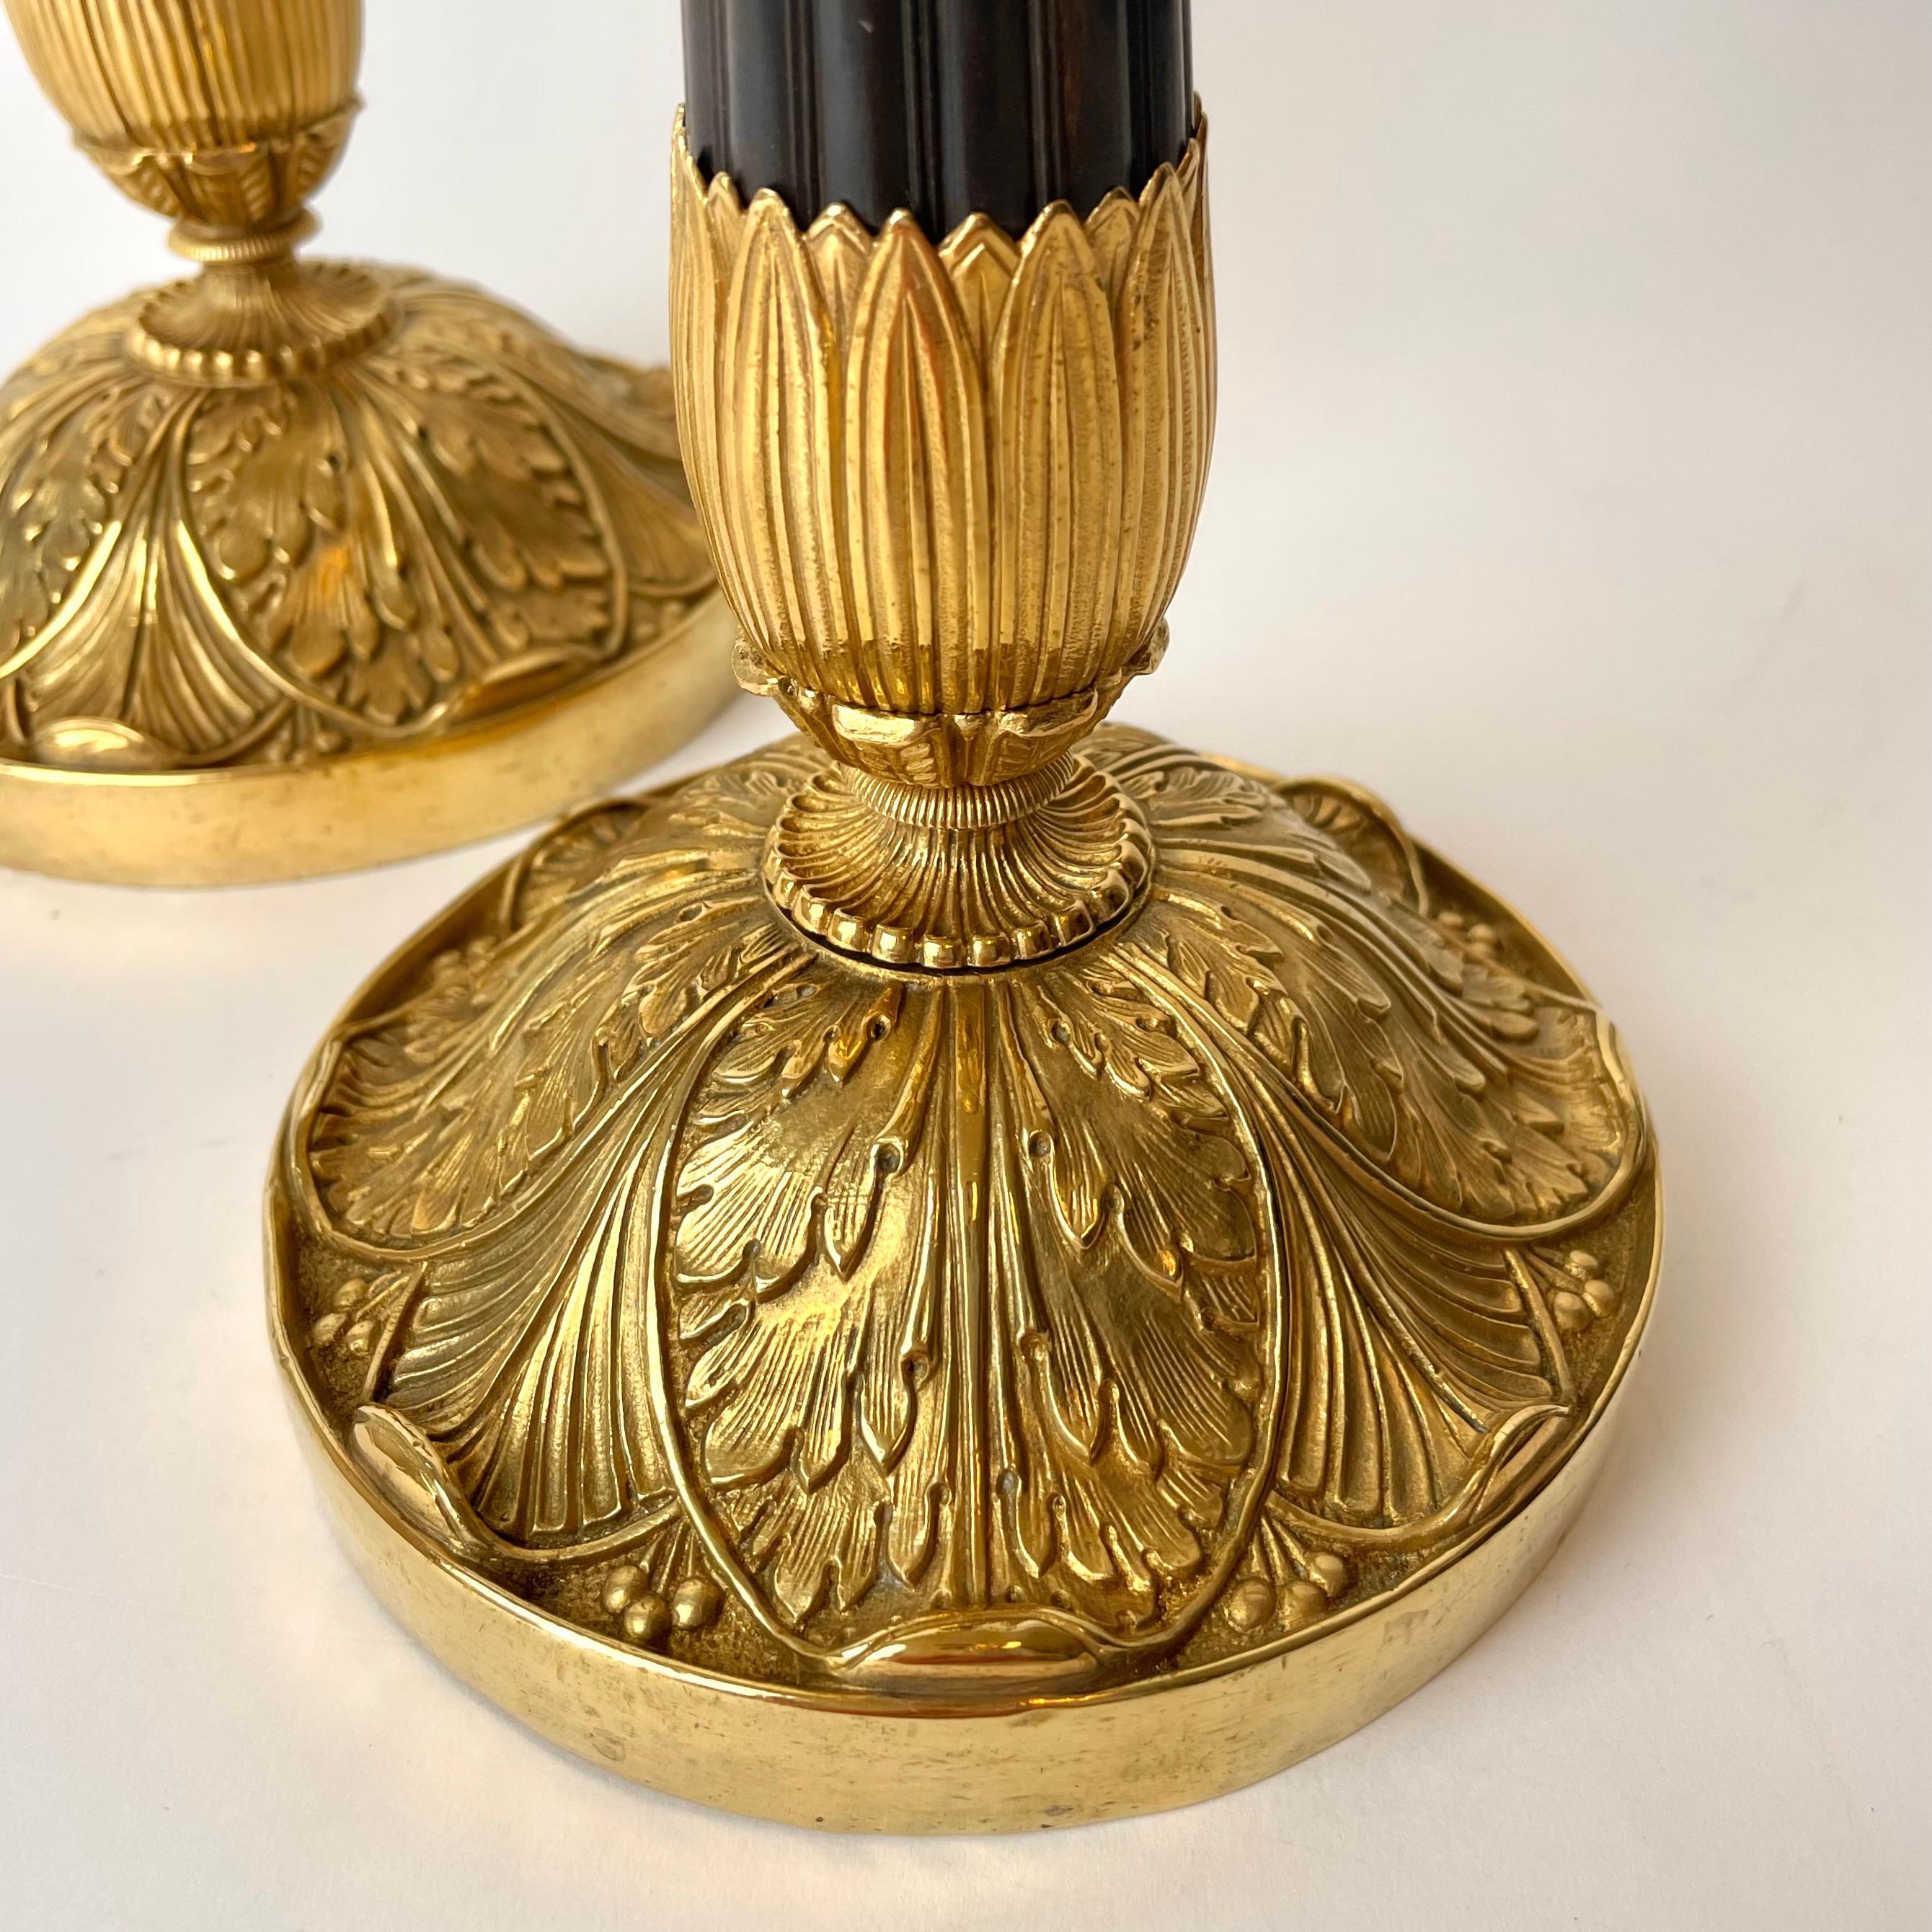 Gilt Pair of Empire Candlesticks, Gilded and Patinated Bronze, Early 19th Century For Sale